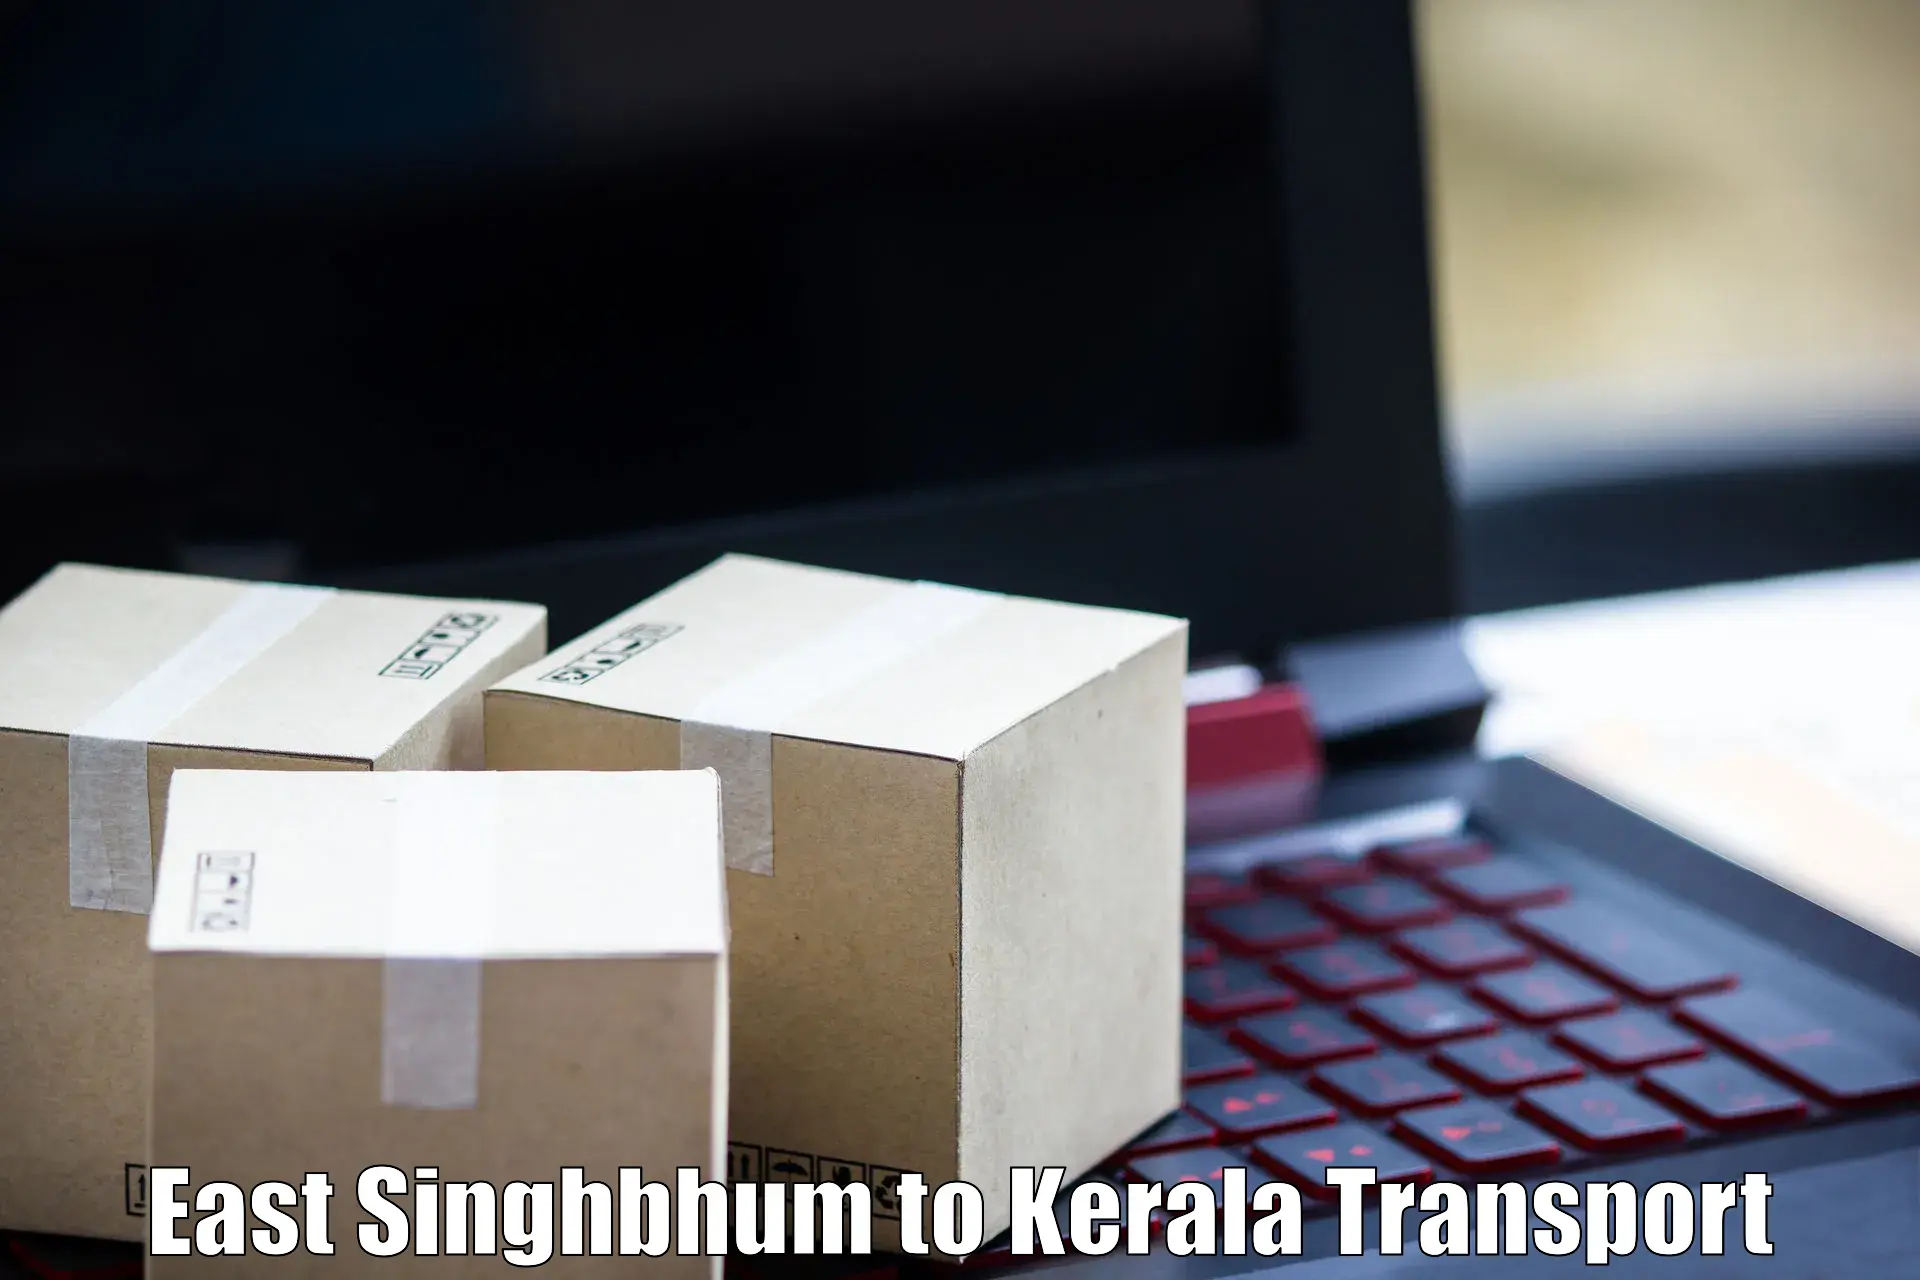 Goods transport services East Singhbhum to Munnar